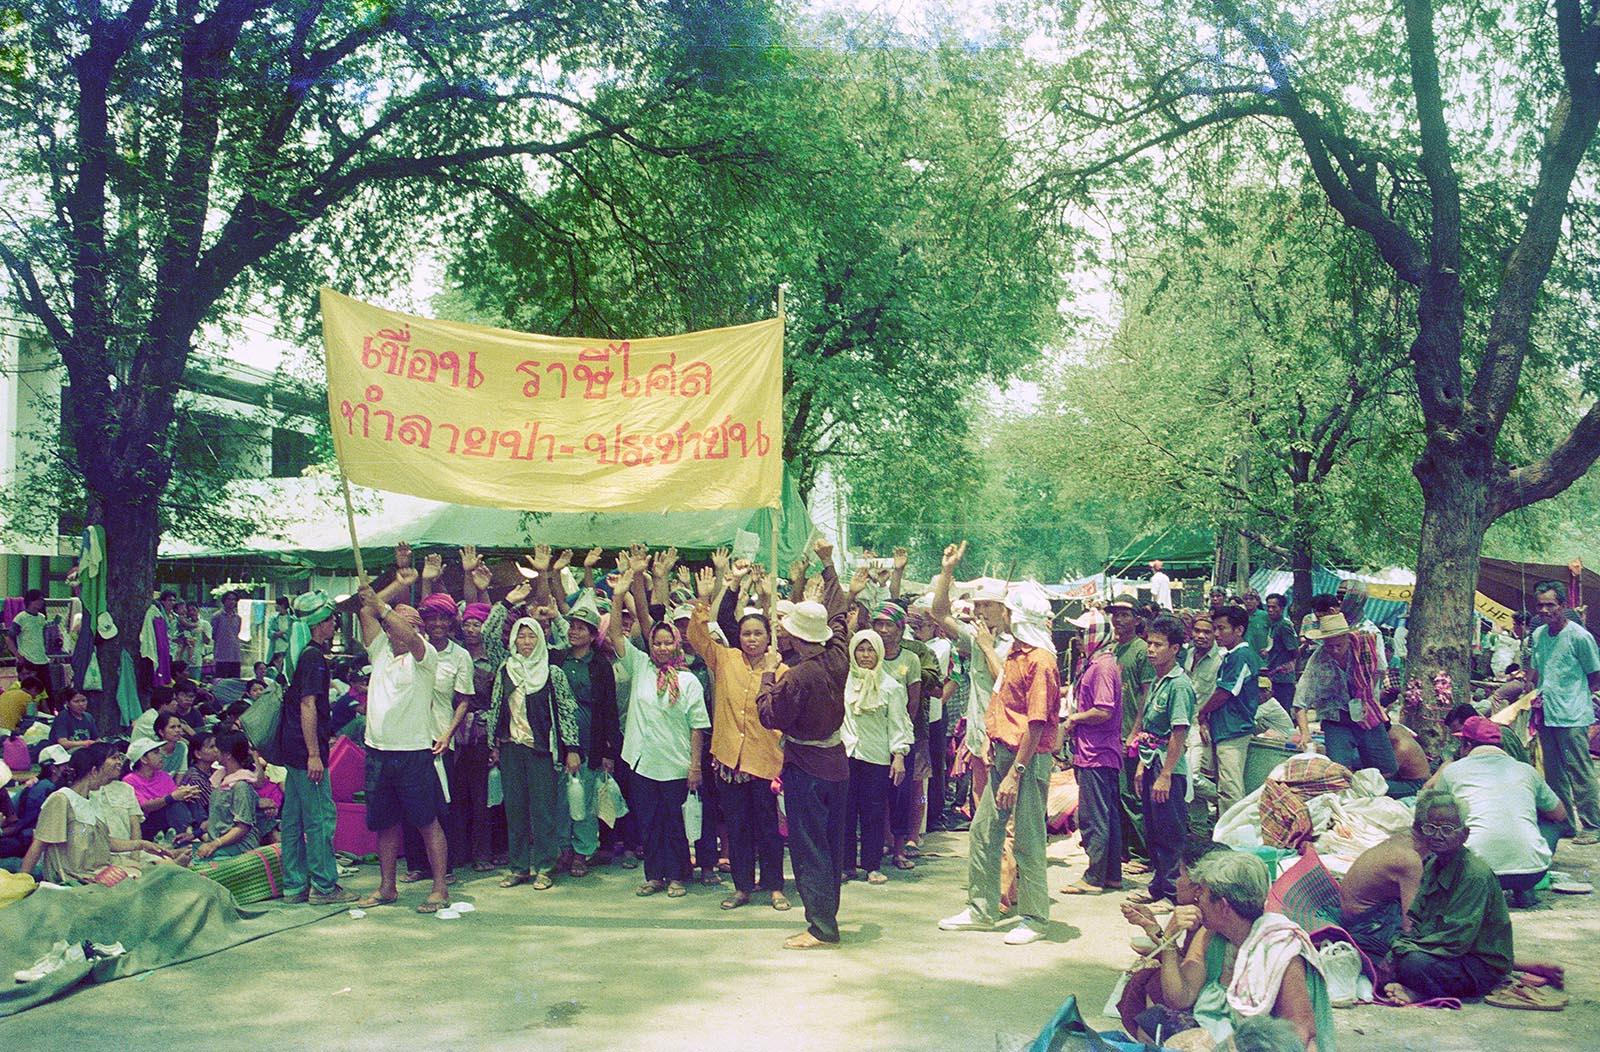 THREE DECADES OF AN ANTI-DAM STRUGGLE - The banner reads "The Rasi Salai dam destroyed our...